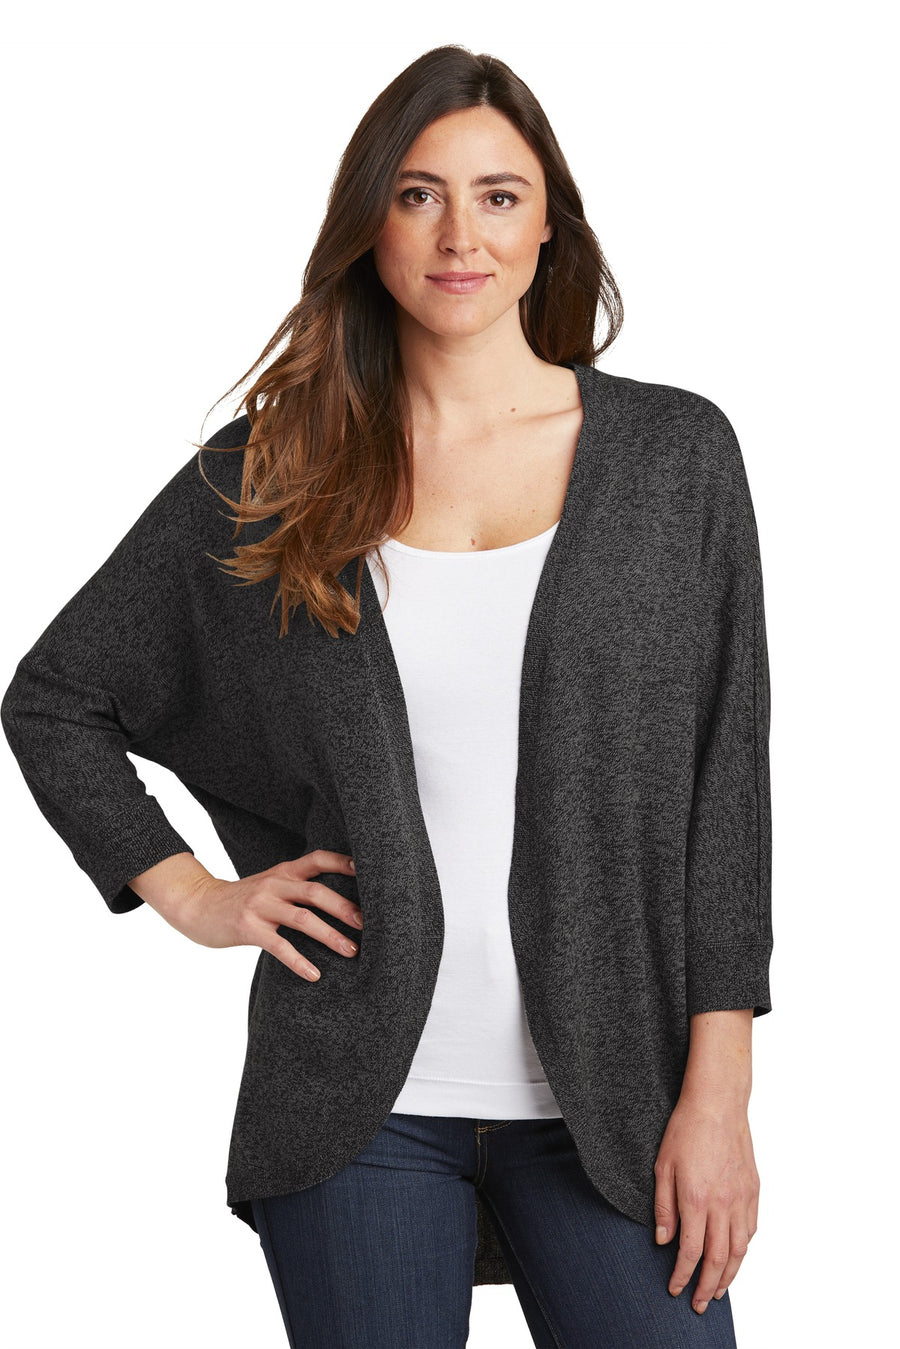 Port Authority Marled Cocoon Sweater.